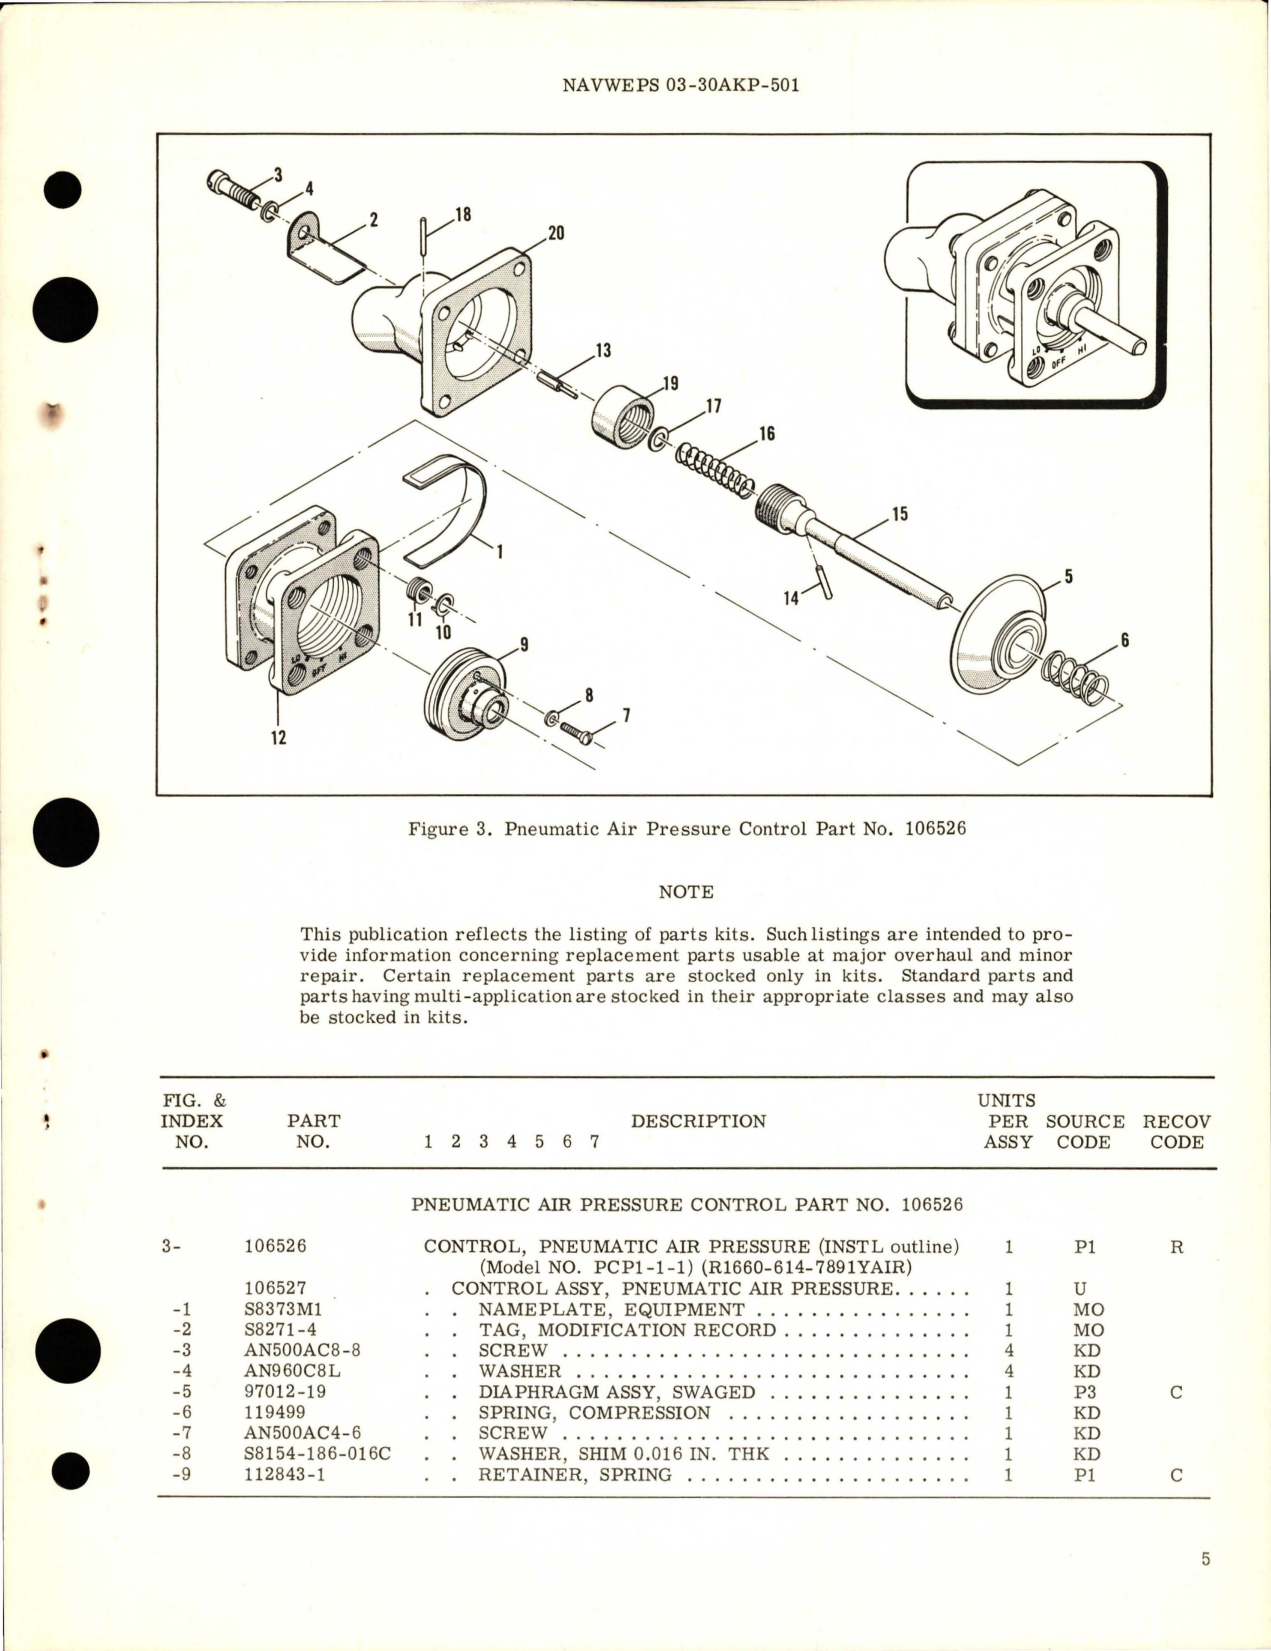 Sample page 5 from AirCorps Library document: Overhaul Instructions with Parts Breakdown for Pneumatic Air Pressure Control - Part 106526